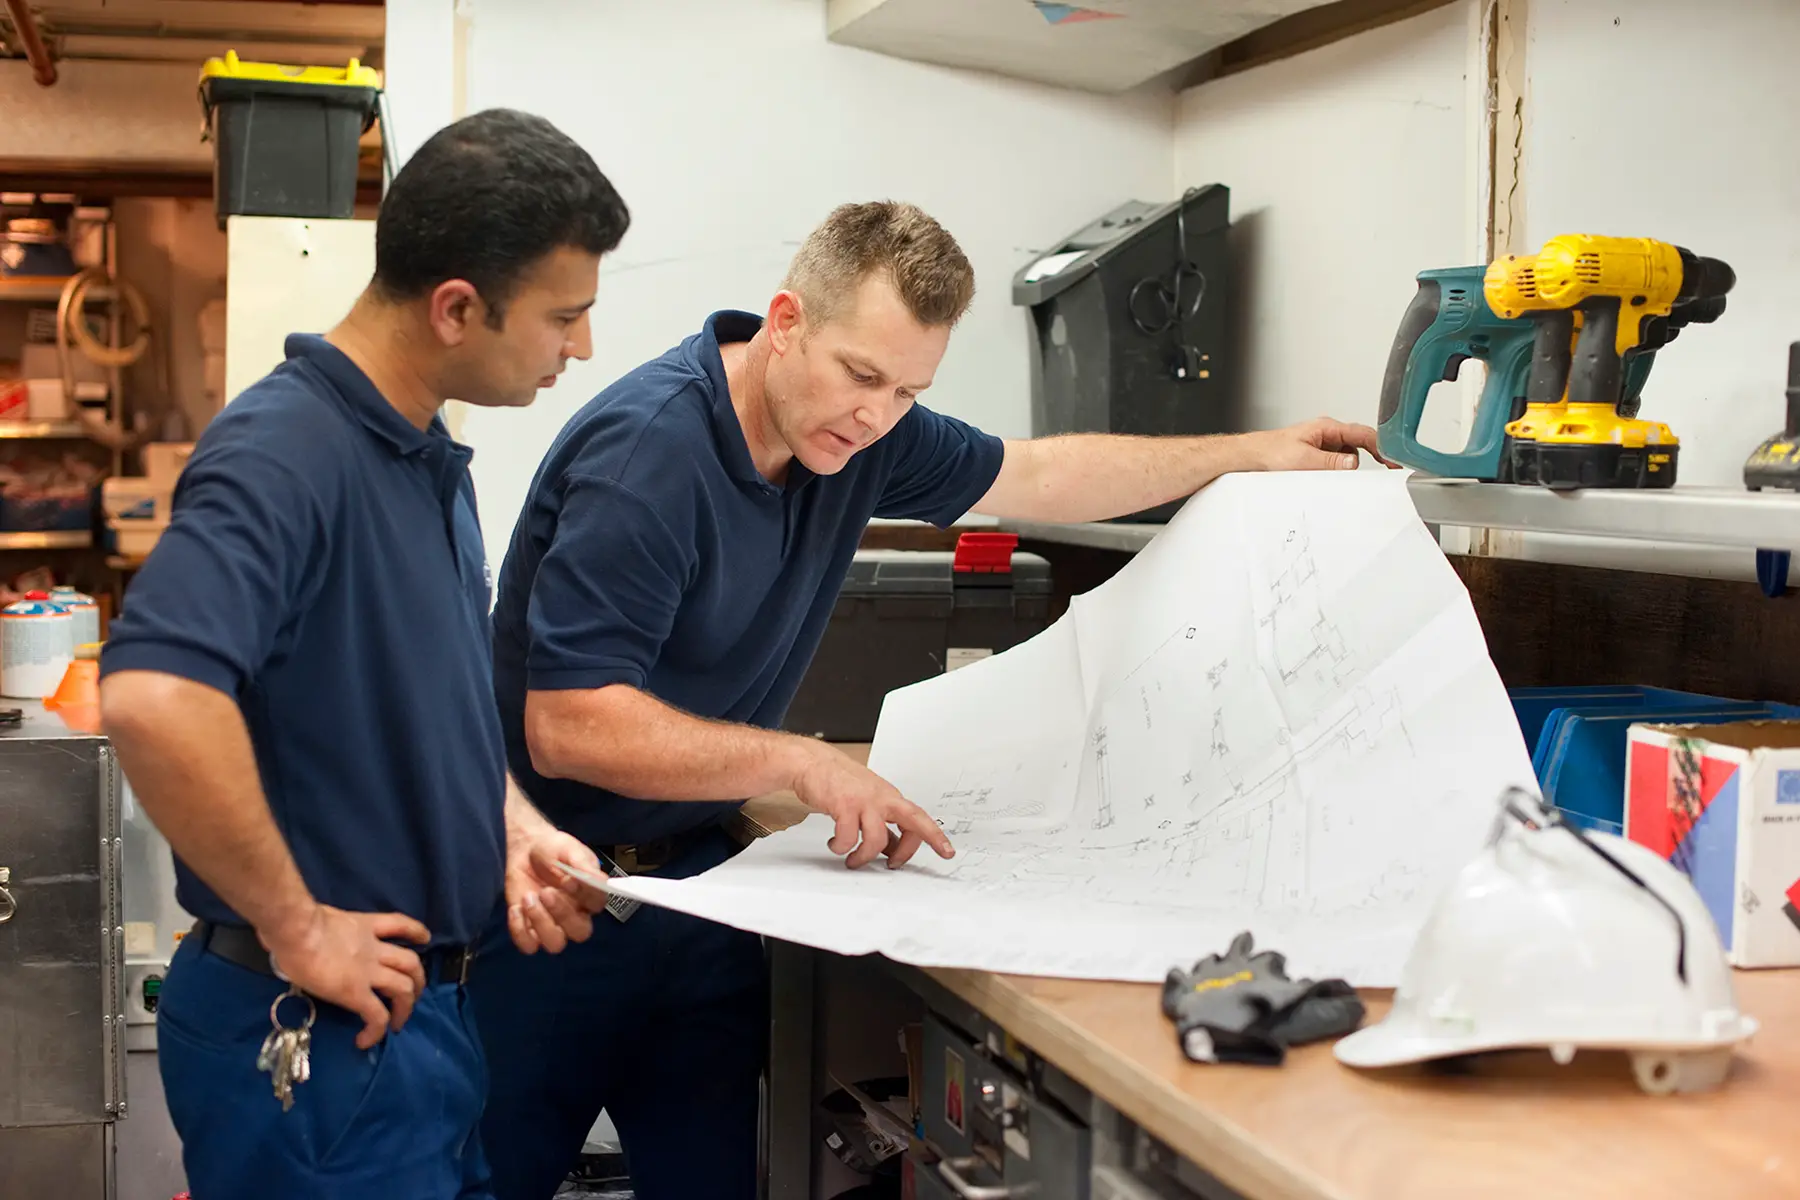 Men in a workshop look at plans on a big piece of paper